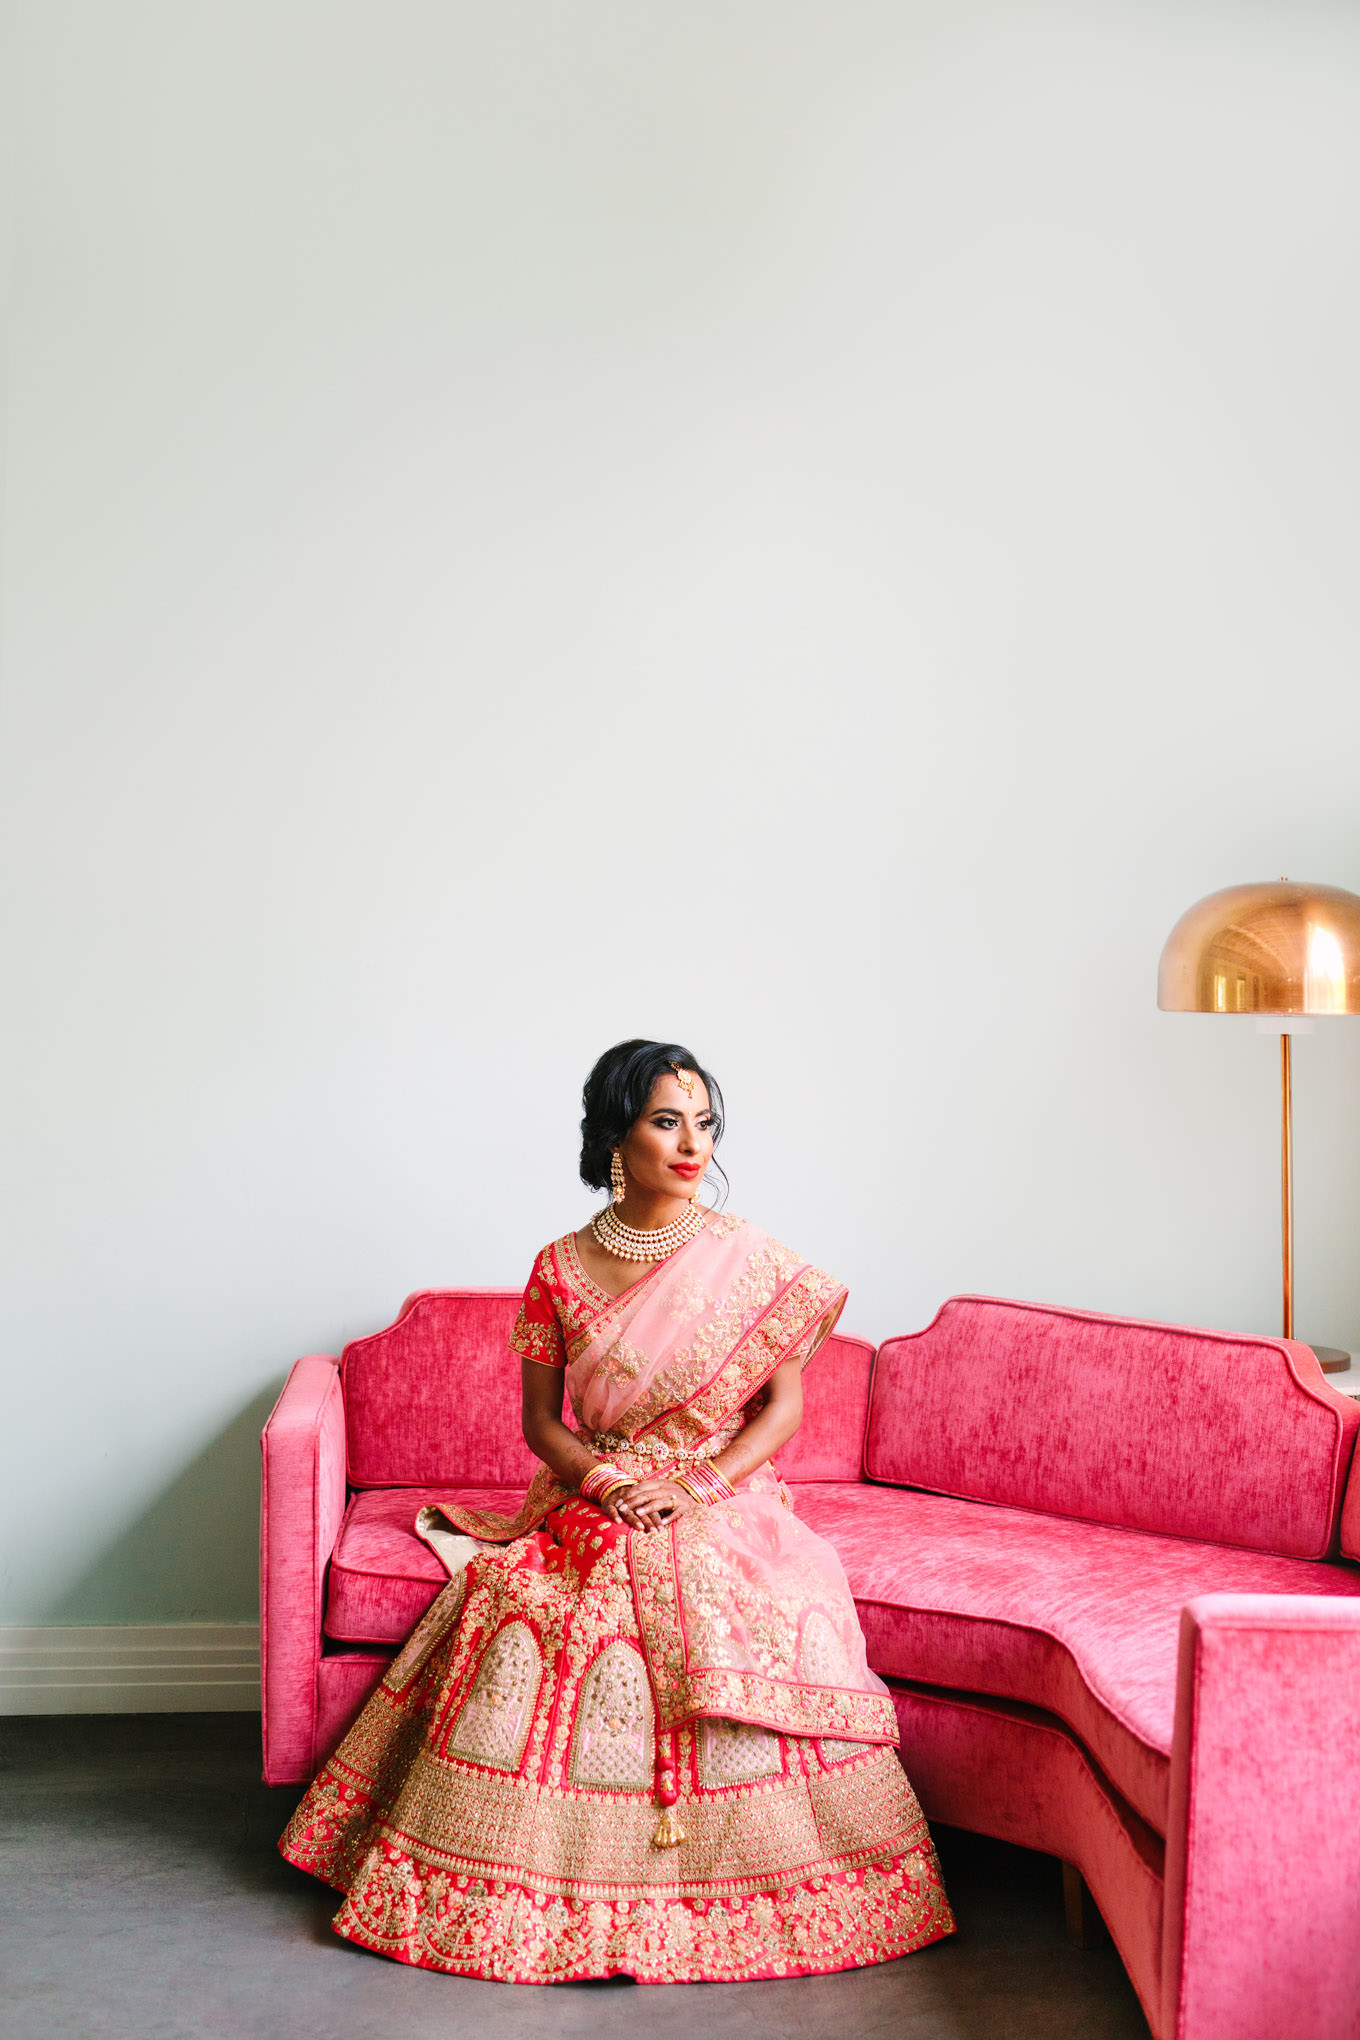 Bride in red saree. Two Disney artists create a unique and colorful Indian Fusion wedding at The Fig House Los Angeles, featured on Green Wedding Shoes. | Colorful and elevated wedding inspiration for fun-loving couples in Southern California | #indianwedding #indianfusionwedding #thefighouse #losangeleswedding   Source: Mary Costa Photography | Los Angeles